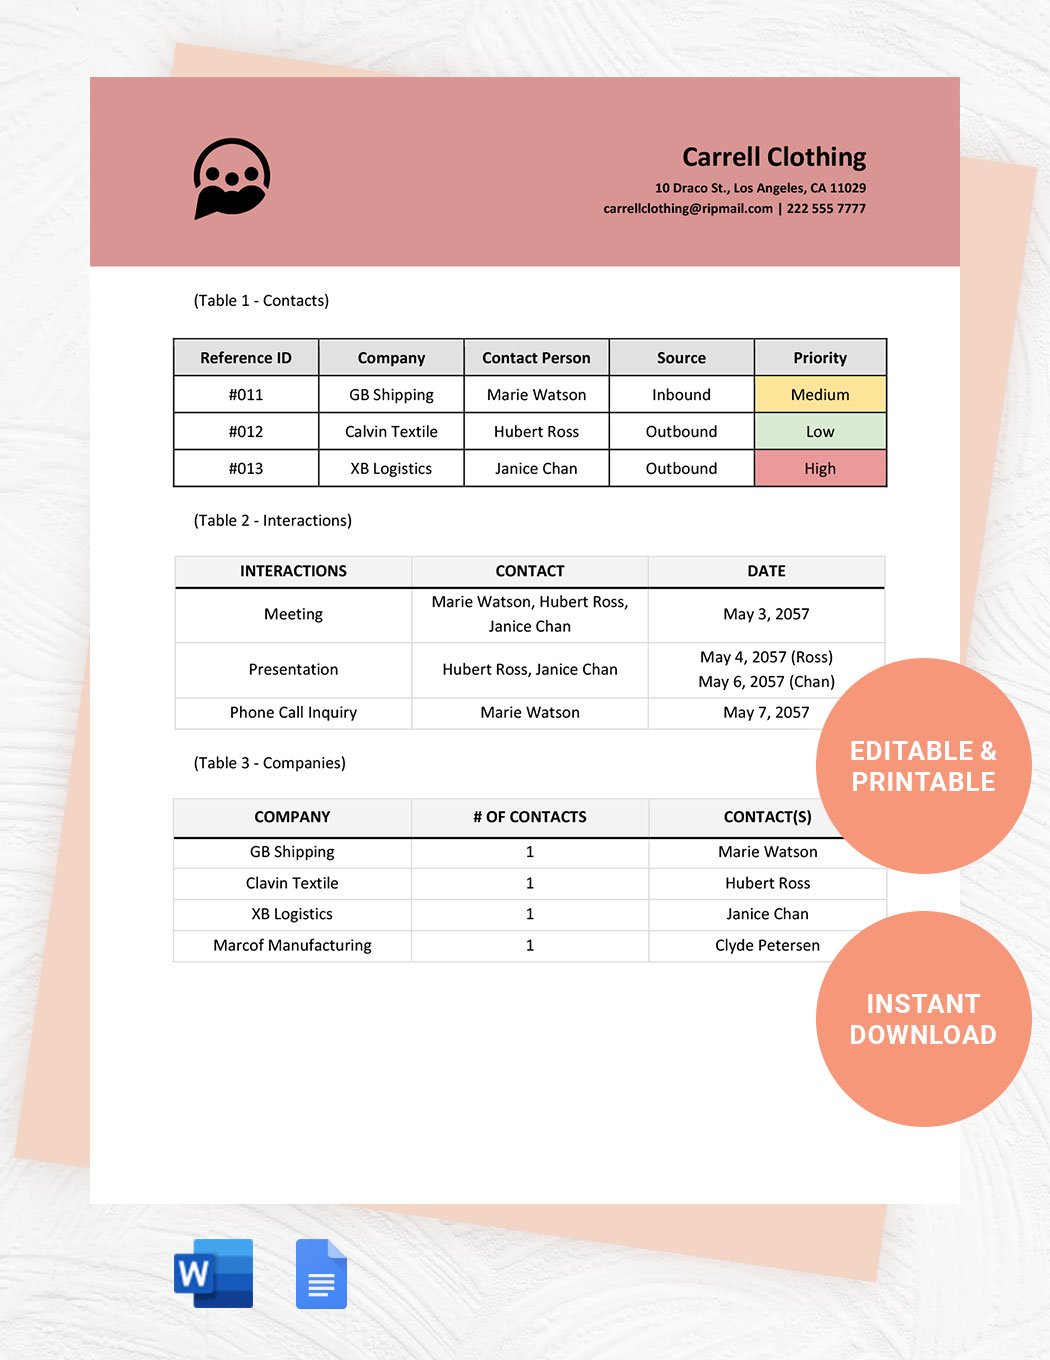 CRM Template